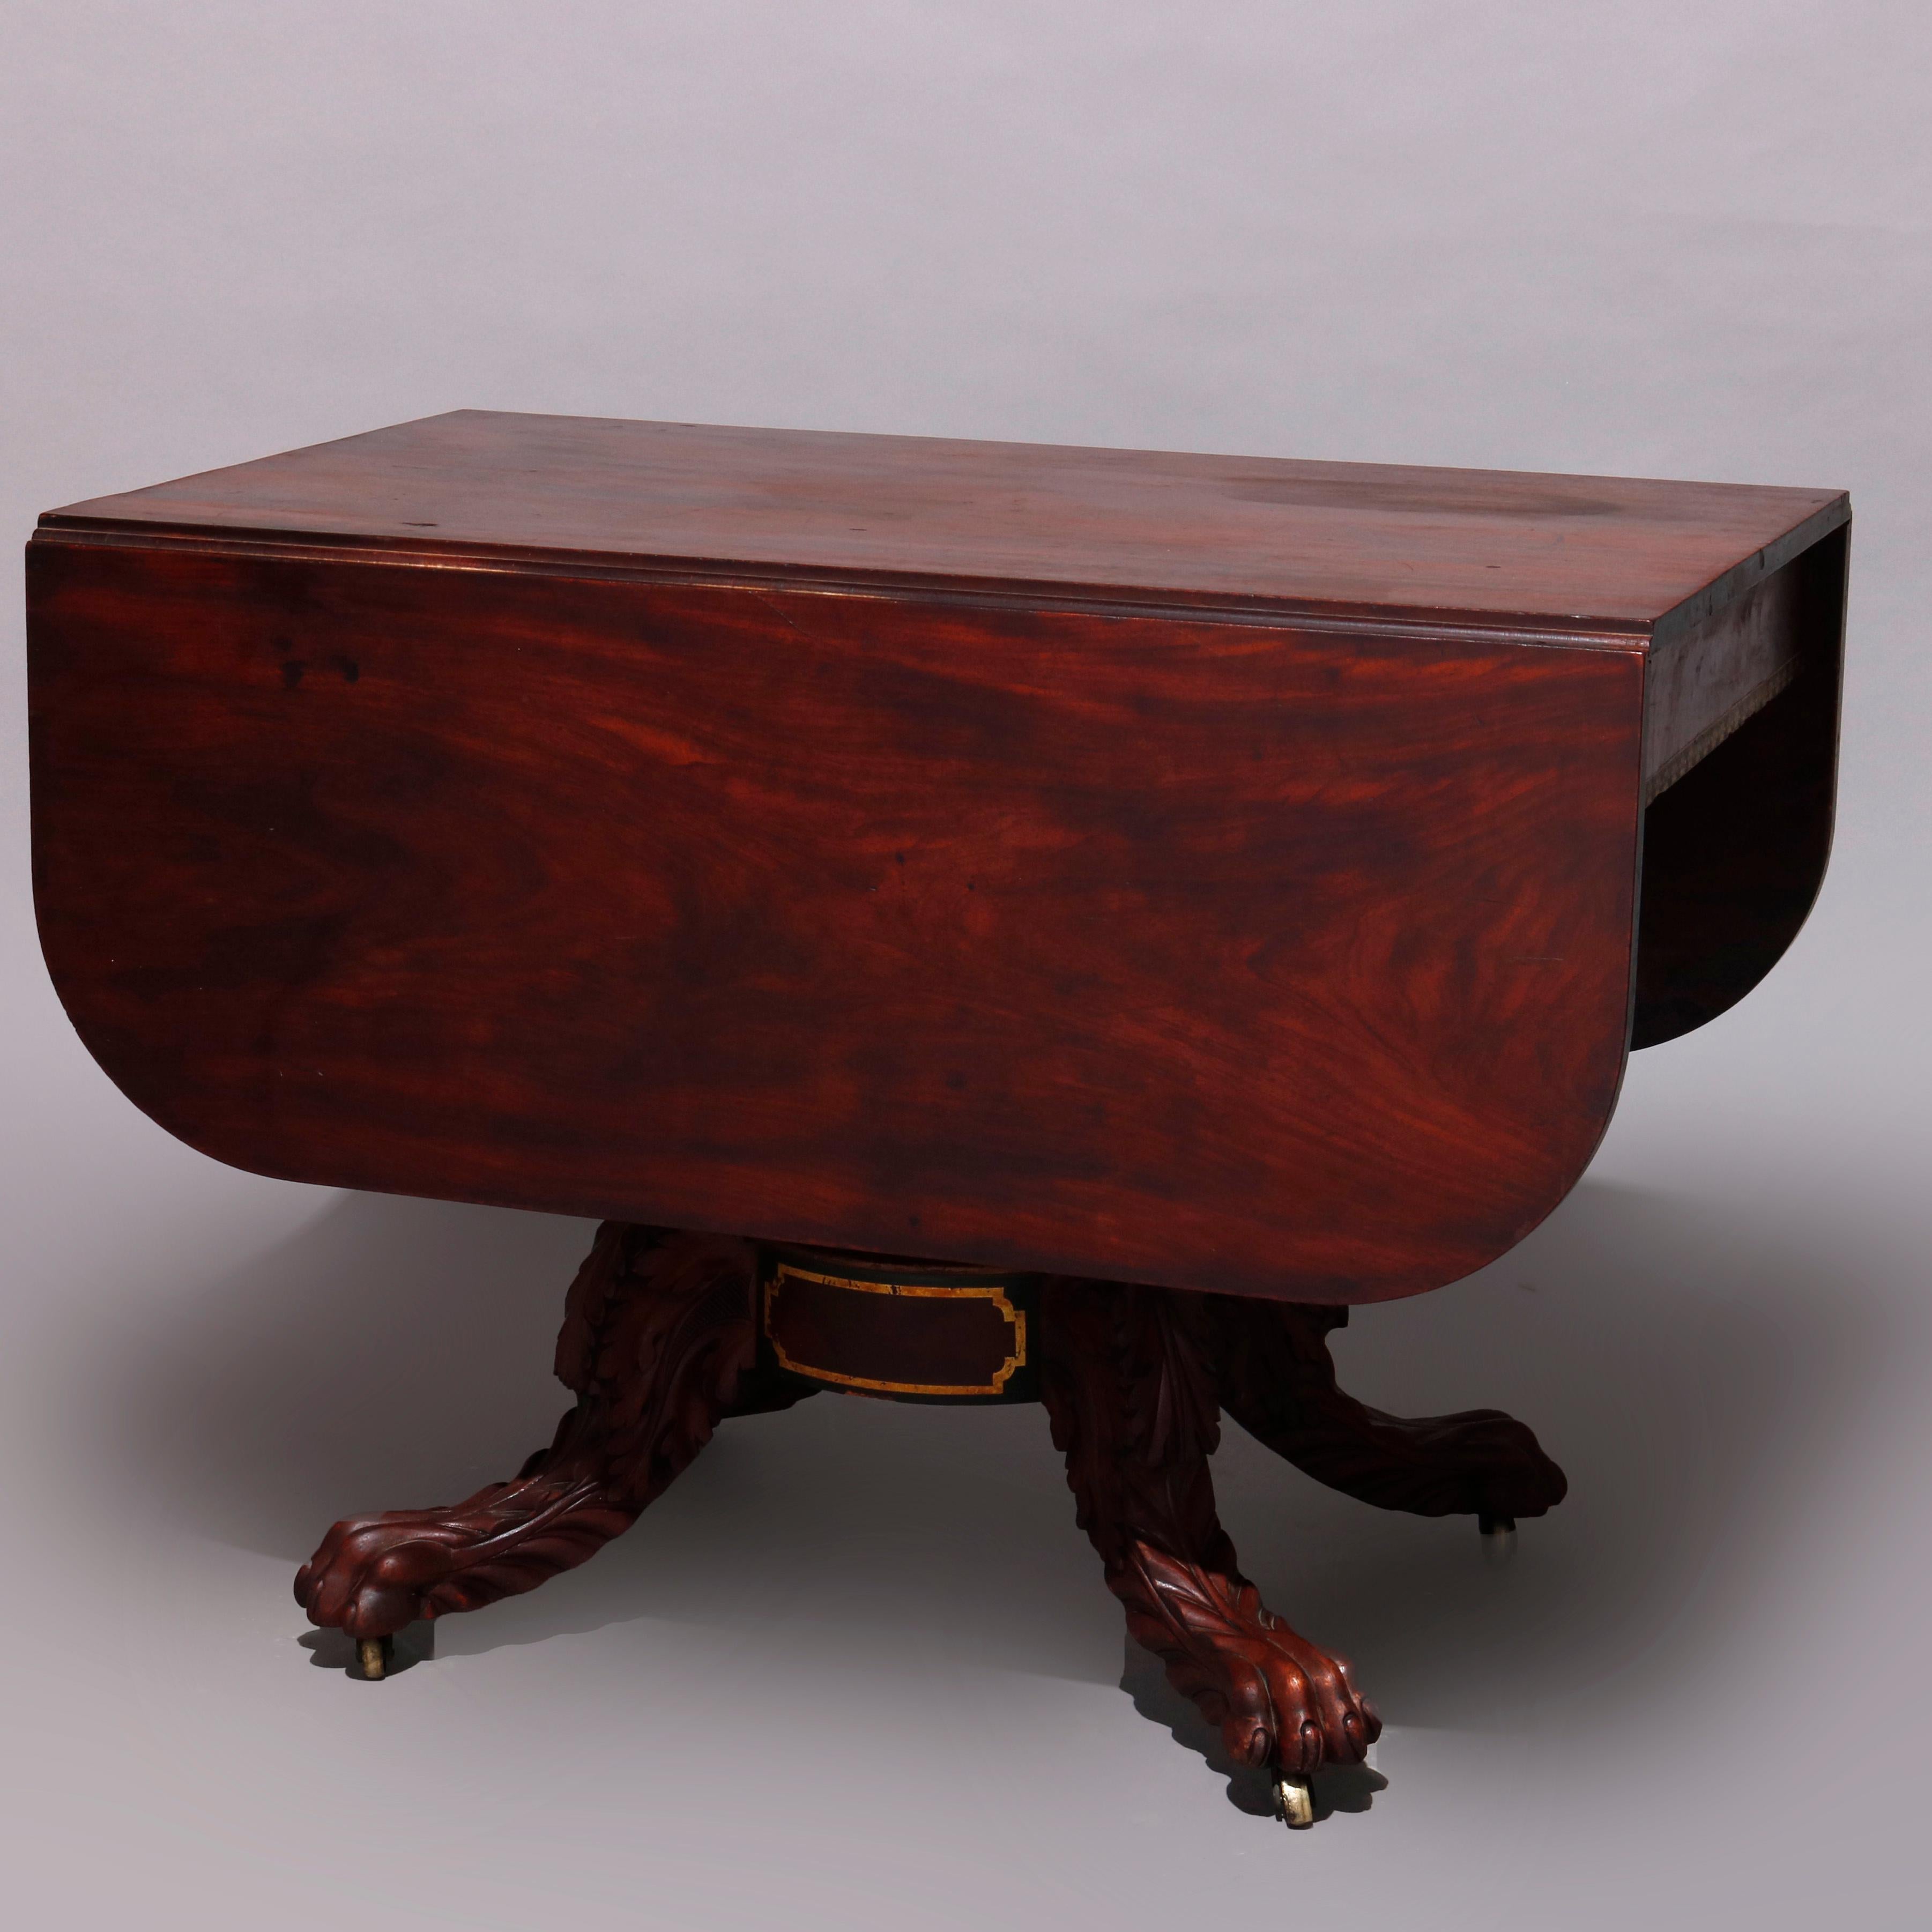 American Empire Classical Flame Mahogany and Gilt Table, Manner of Meeks 4